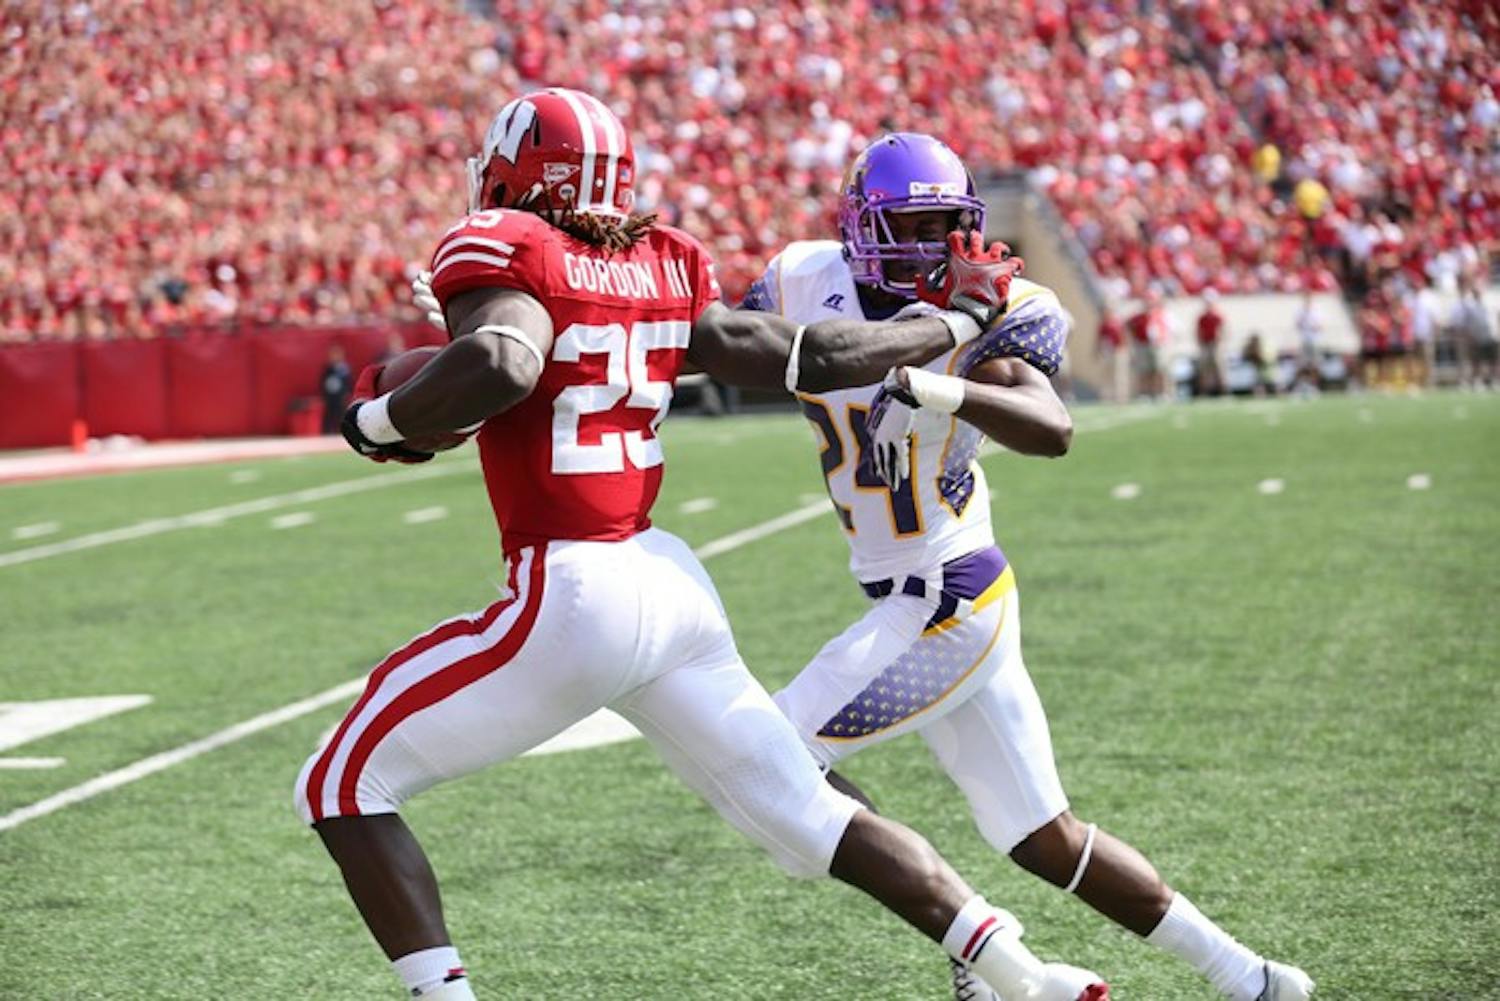 Football: Wisconsin Badgers vs. Tennessee Tech Golden Eagles